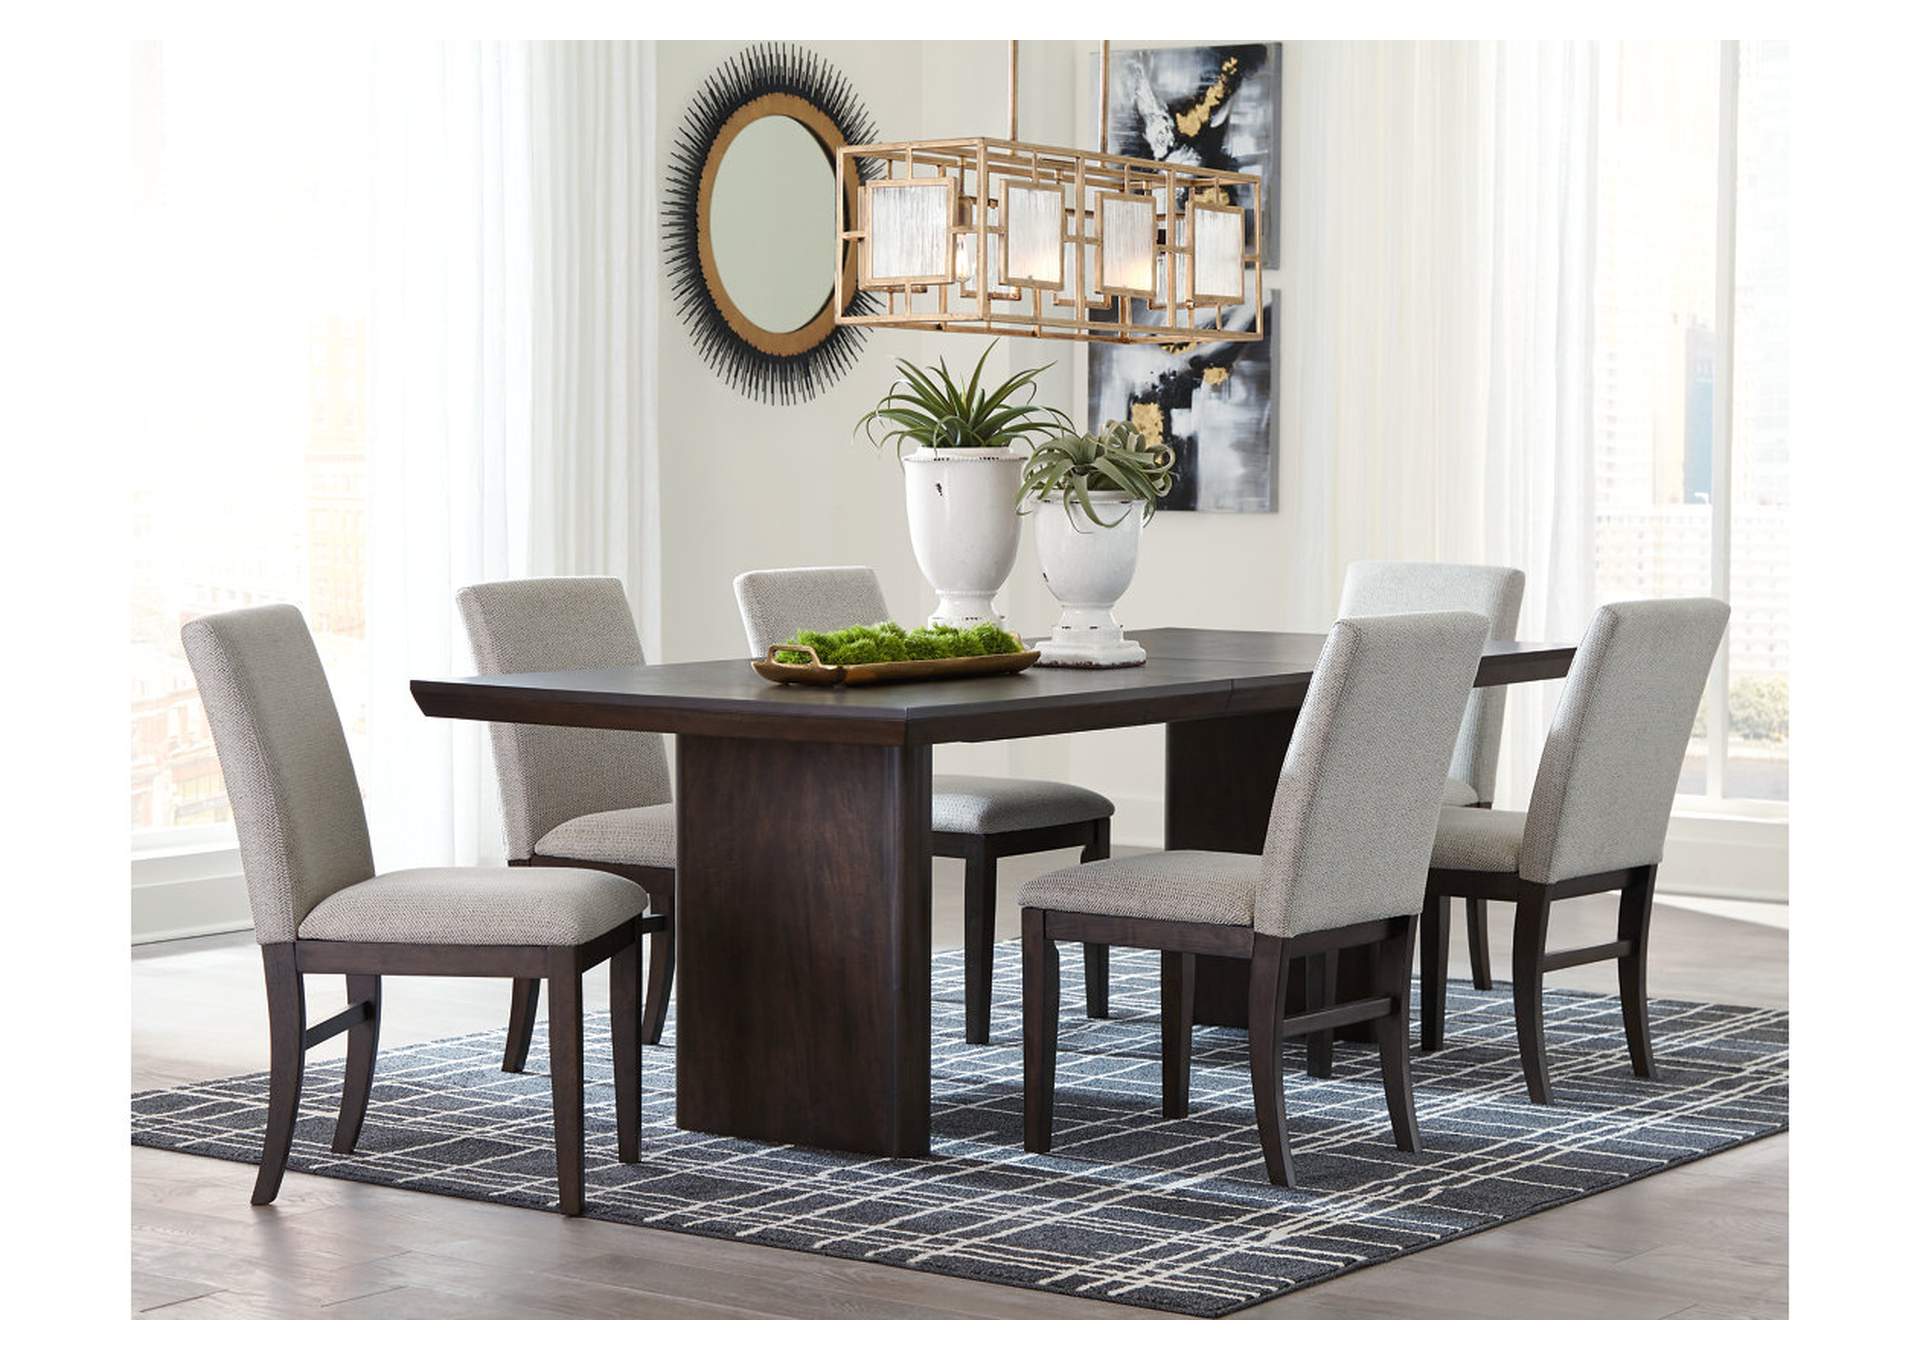 Bruxworth Dining Table and 6 Chairs,Millennium